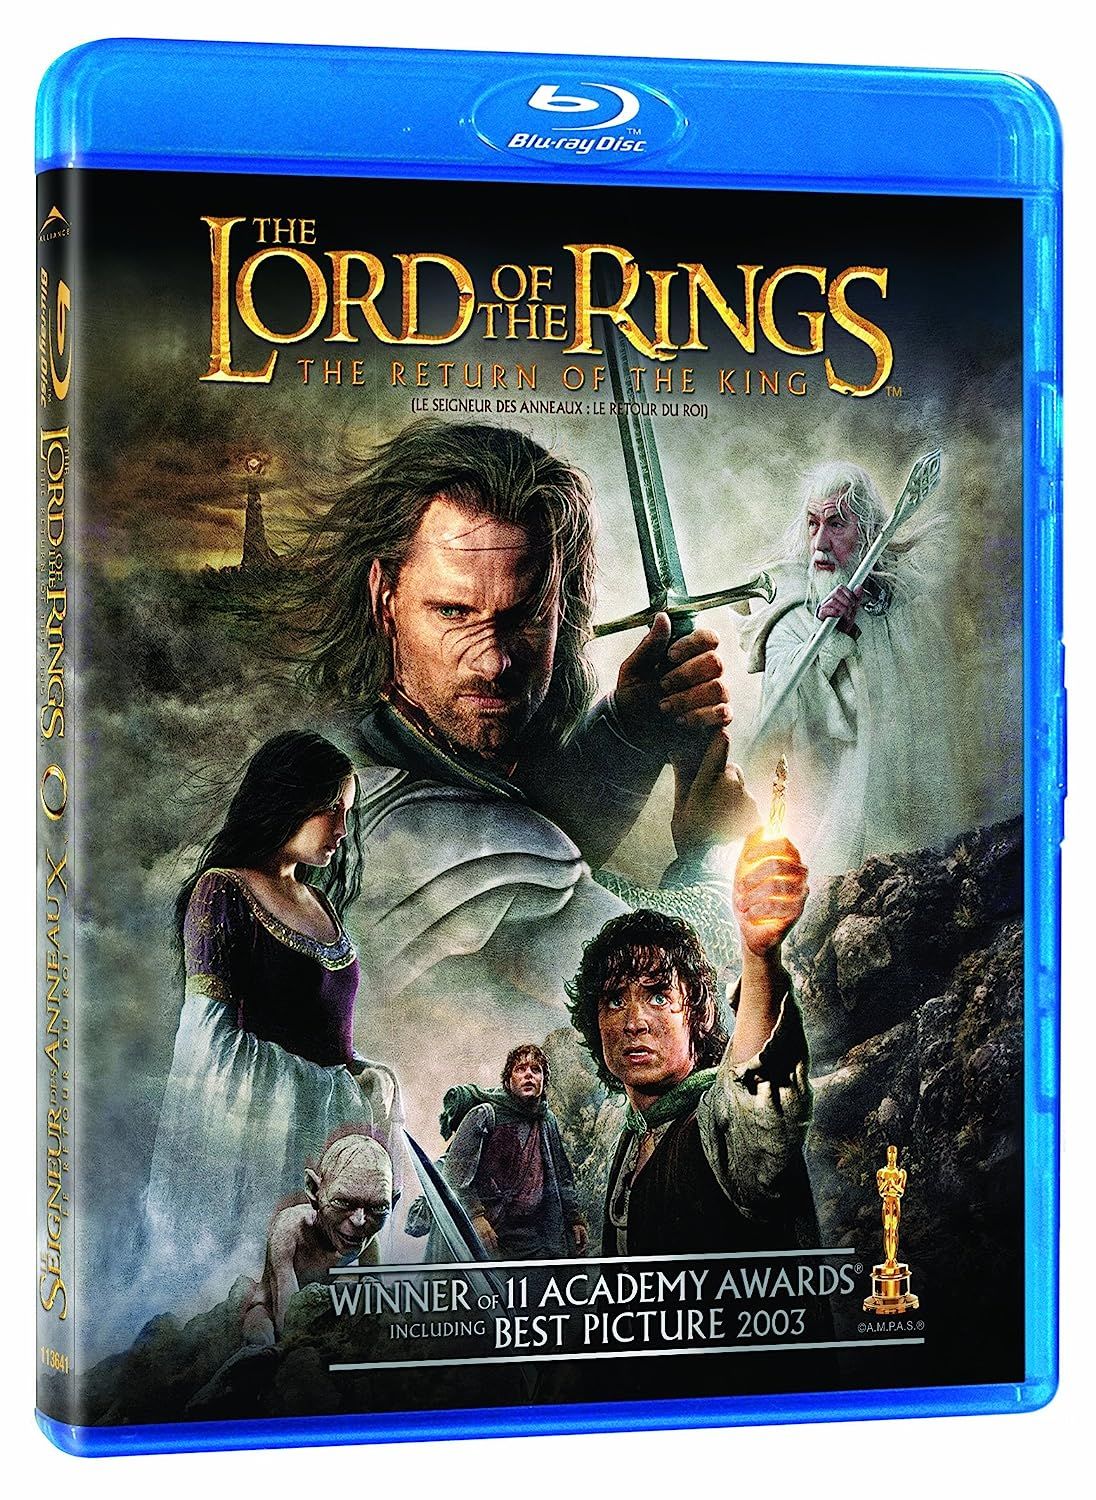 The Lord of the Rings - The Return of the King 